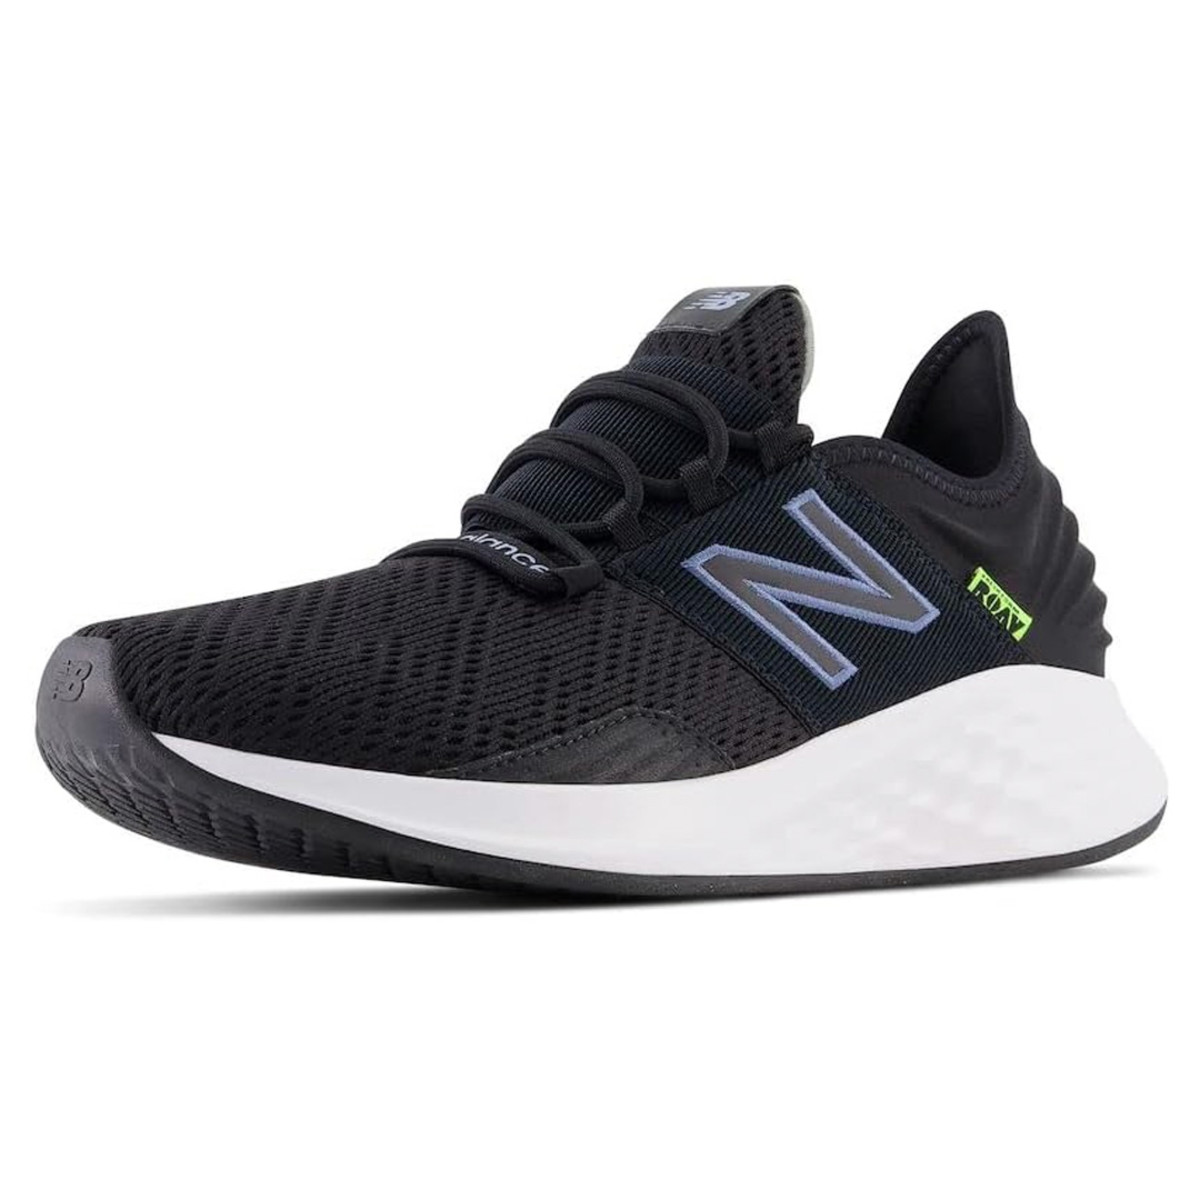 The New Balance Fresh Foam Roav V1 Classic Sneakers in Black/White are on sale right now at Amazon